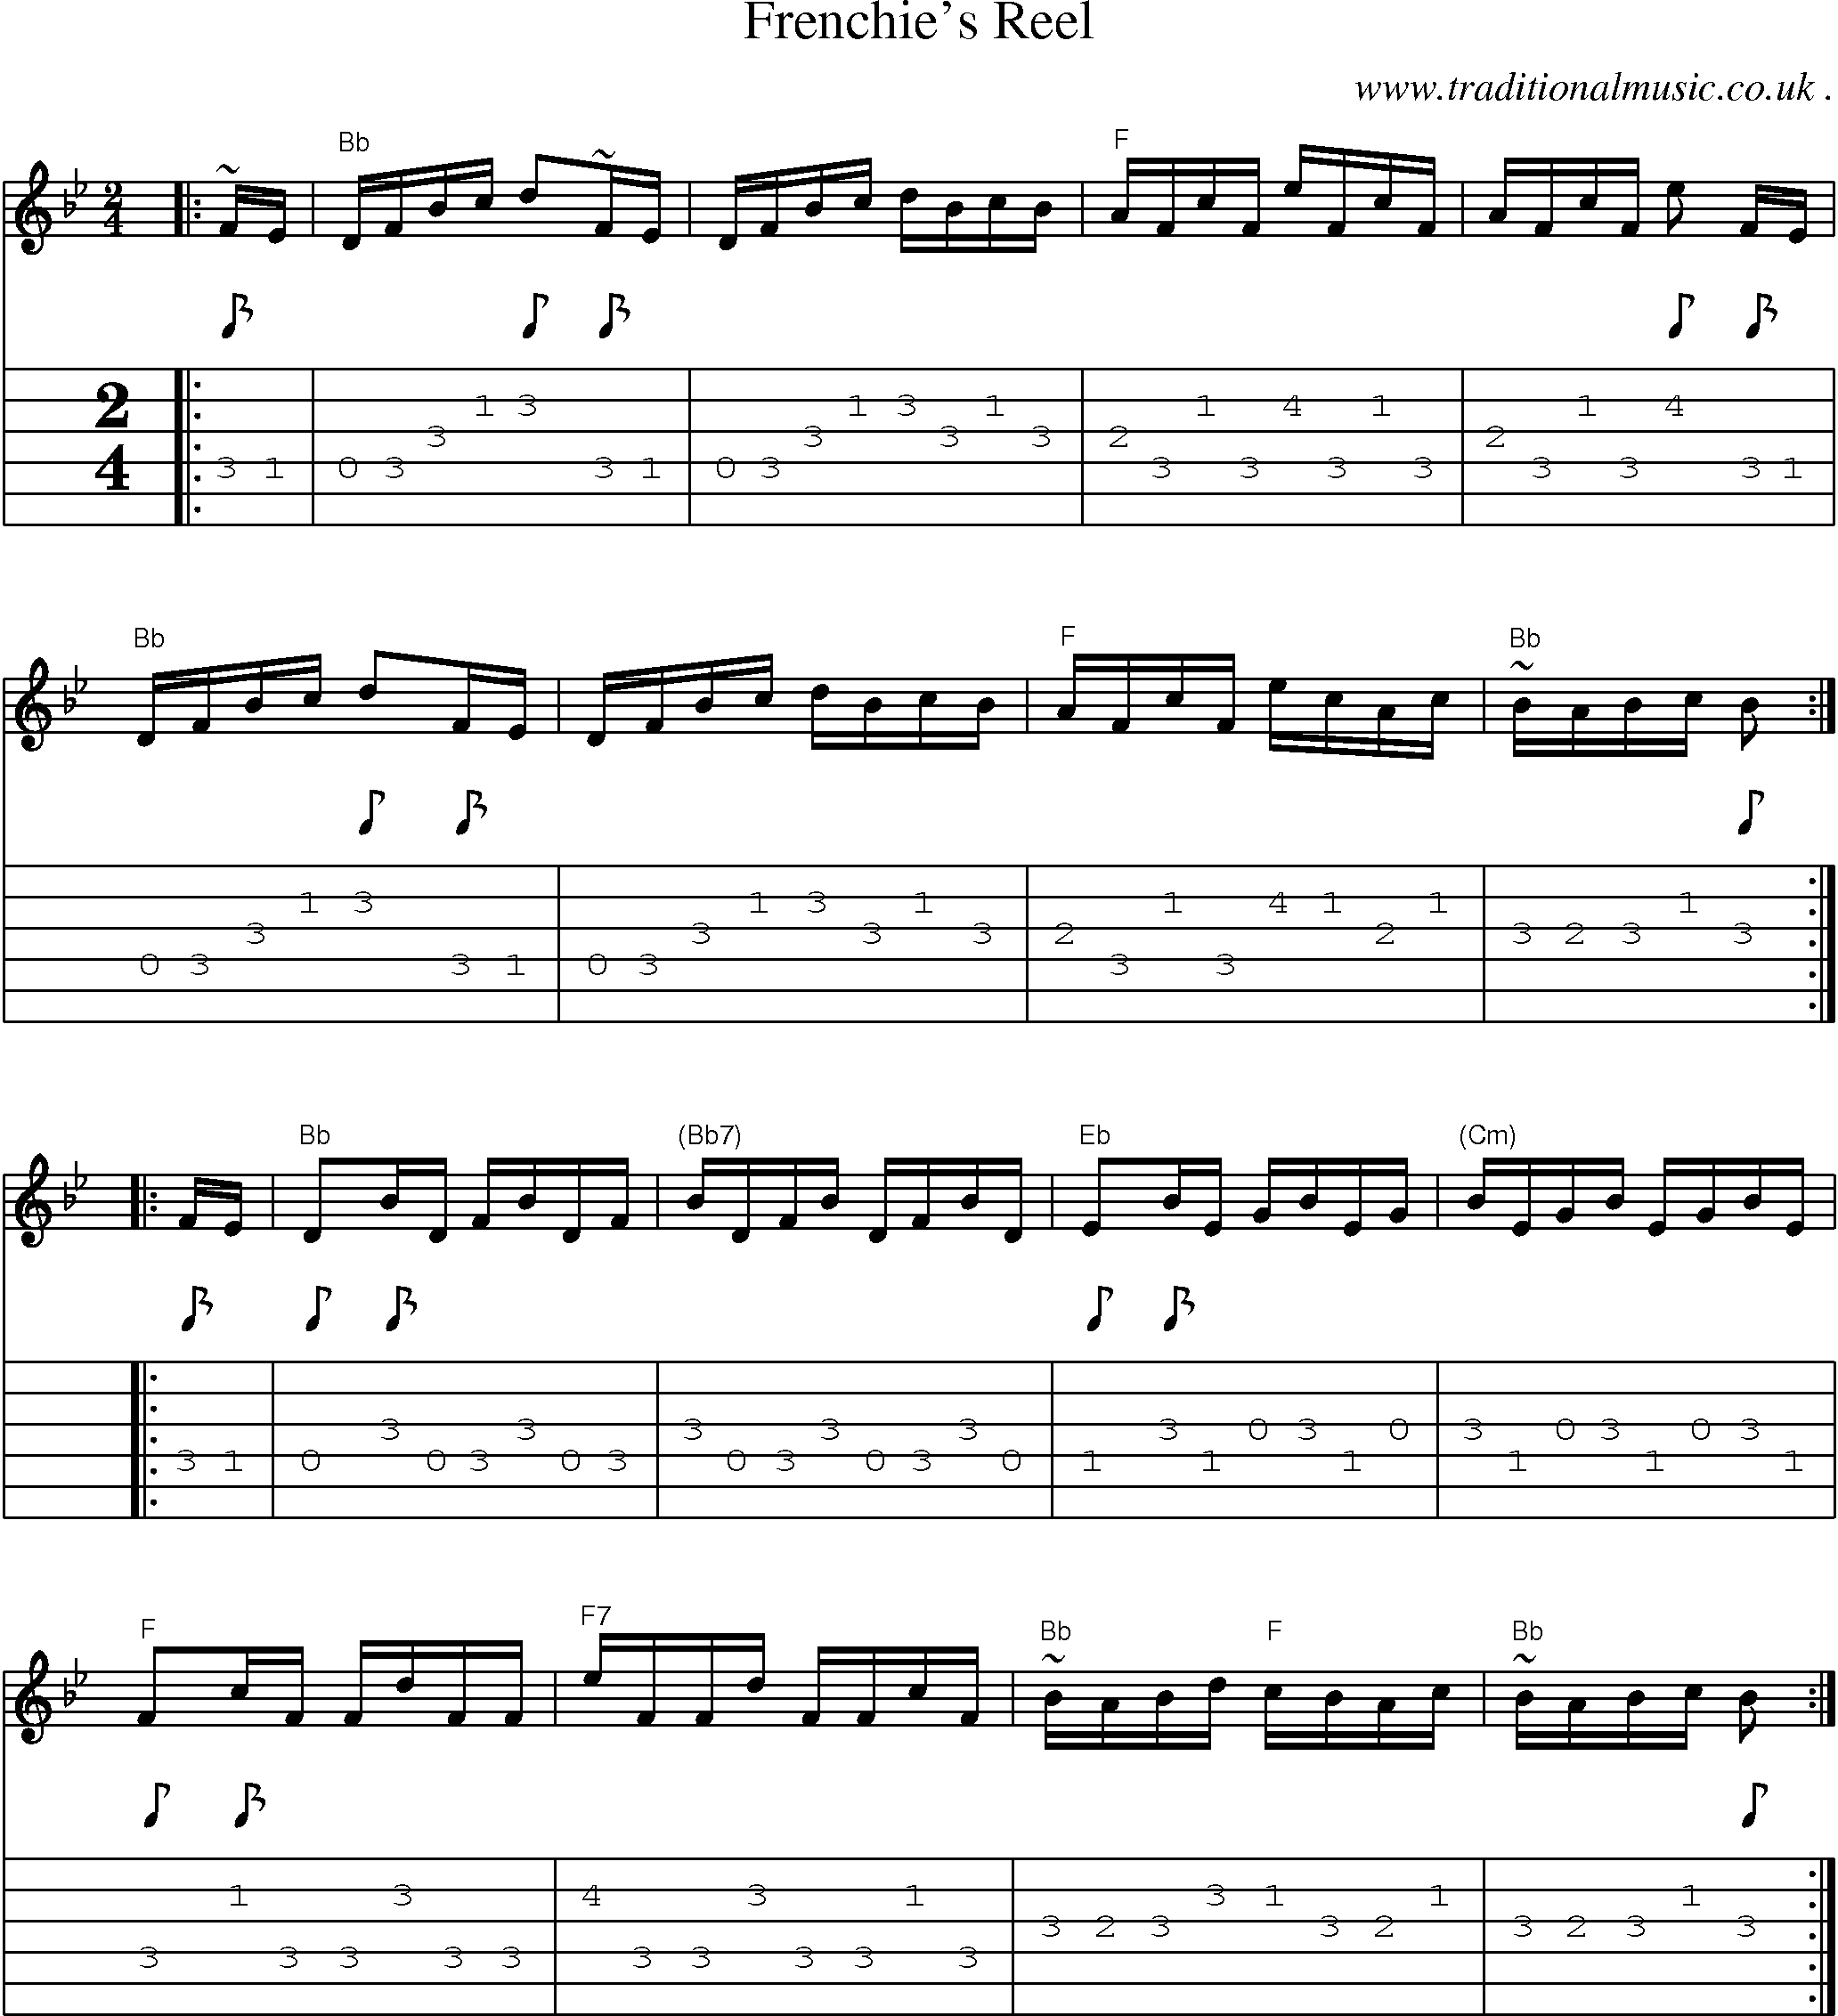 Music Score and Guitar Tabs for Frenchies Reel